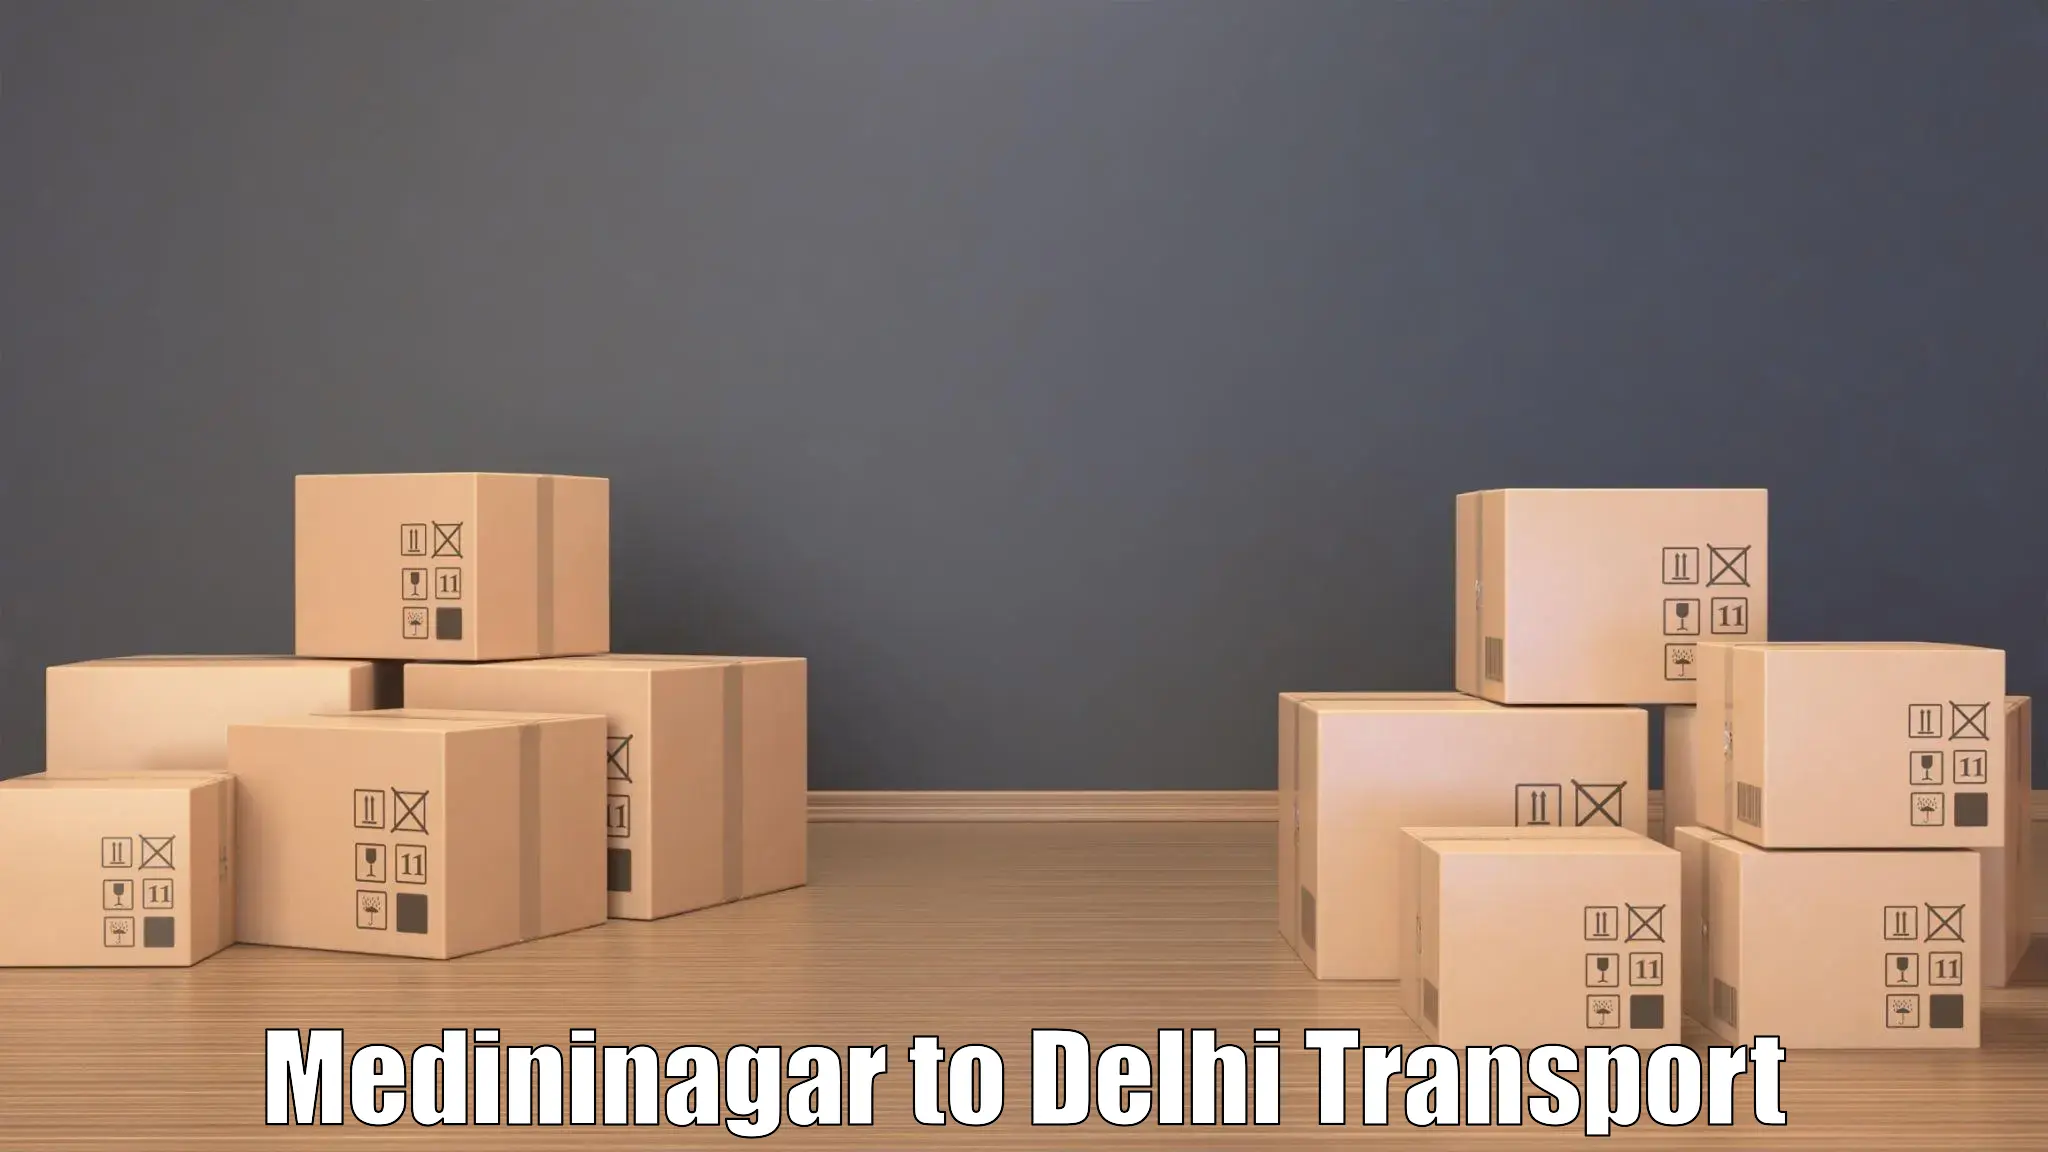 Transport bike from one state to another Medininagar to University of Delhi